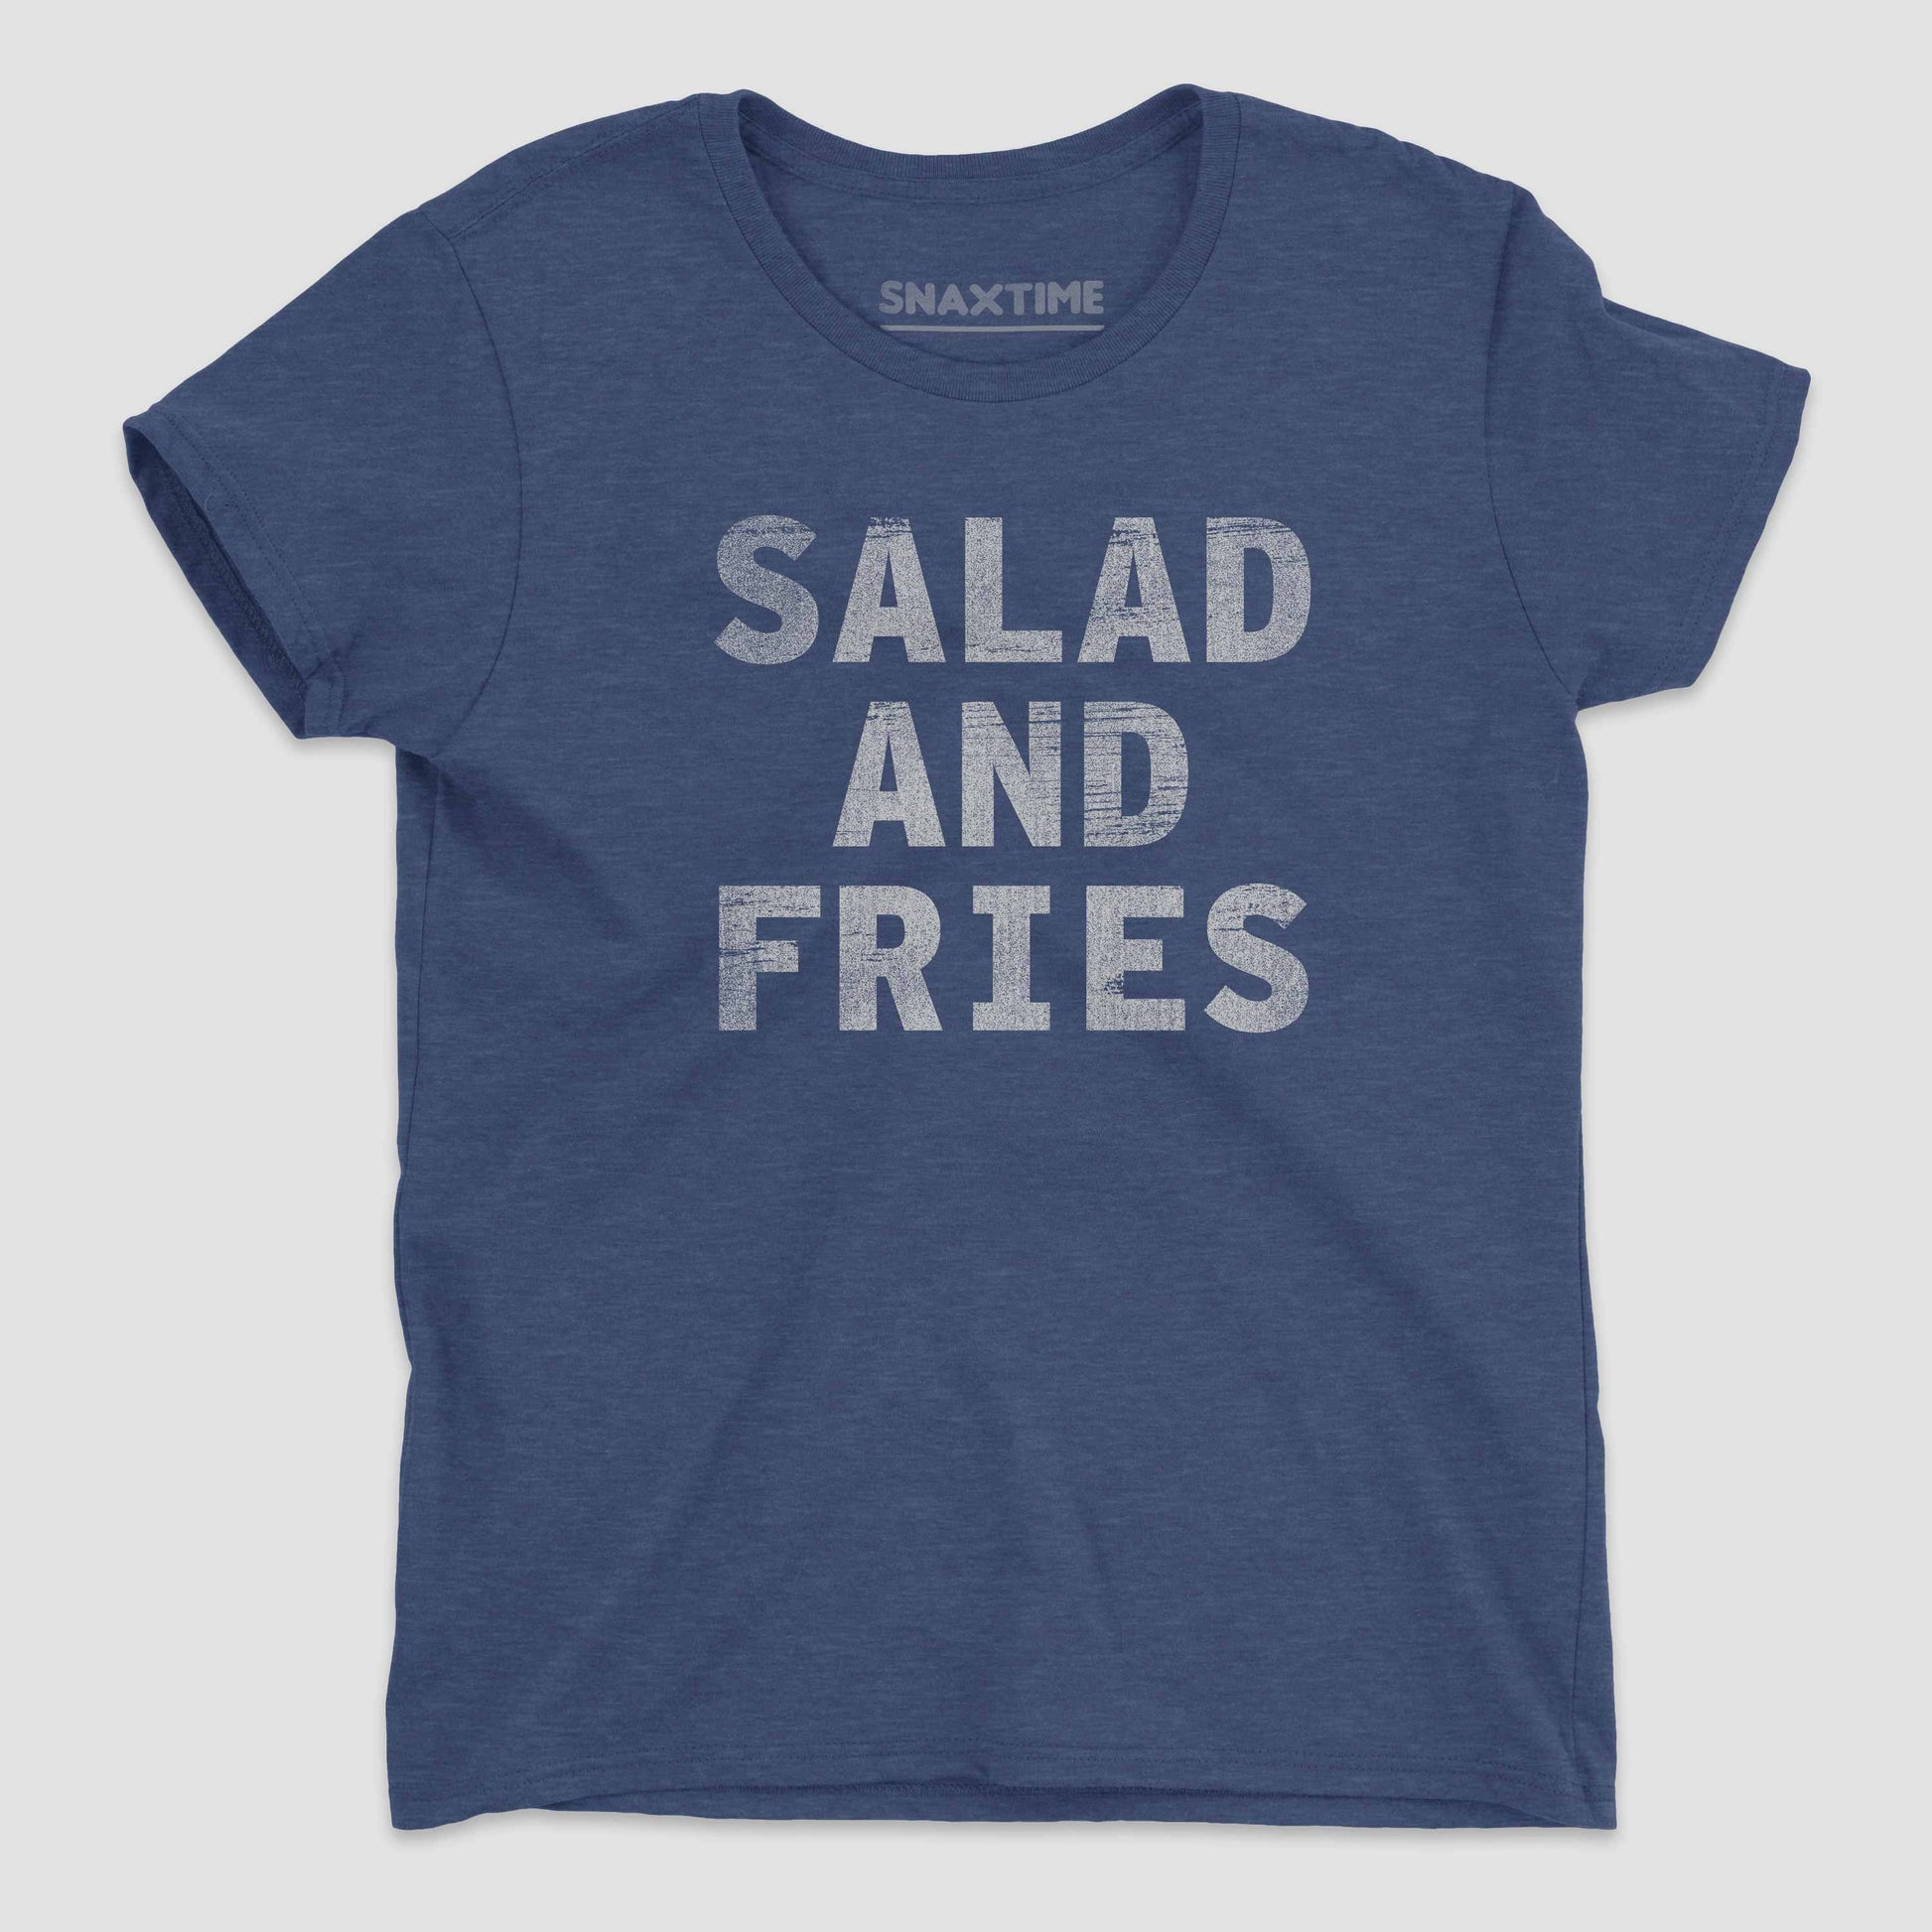 Heather Blue Salad and Fries Women's Graphic T-Shirt by Snaxtime